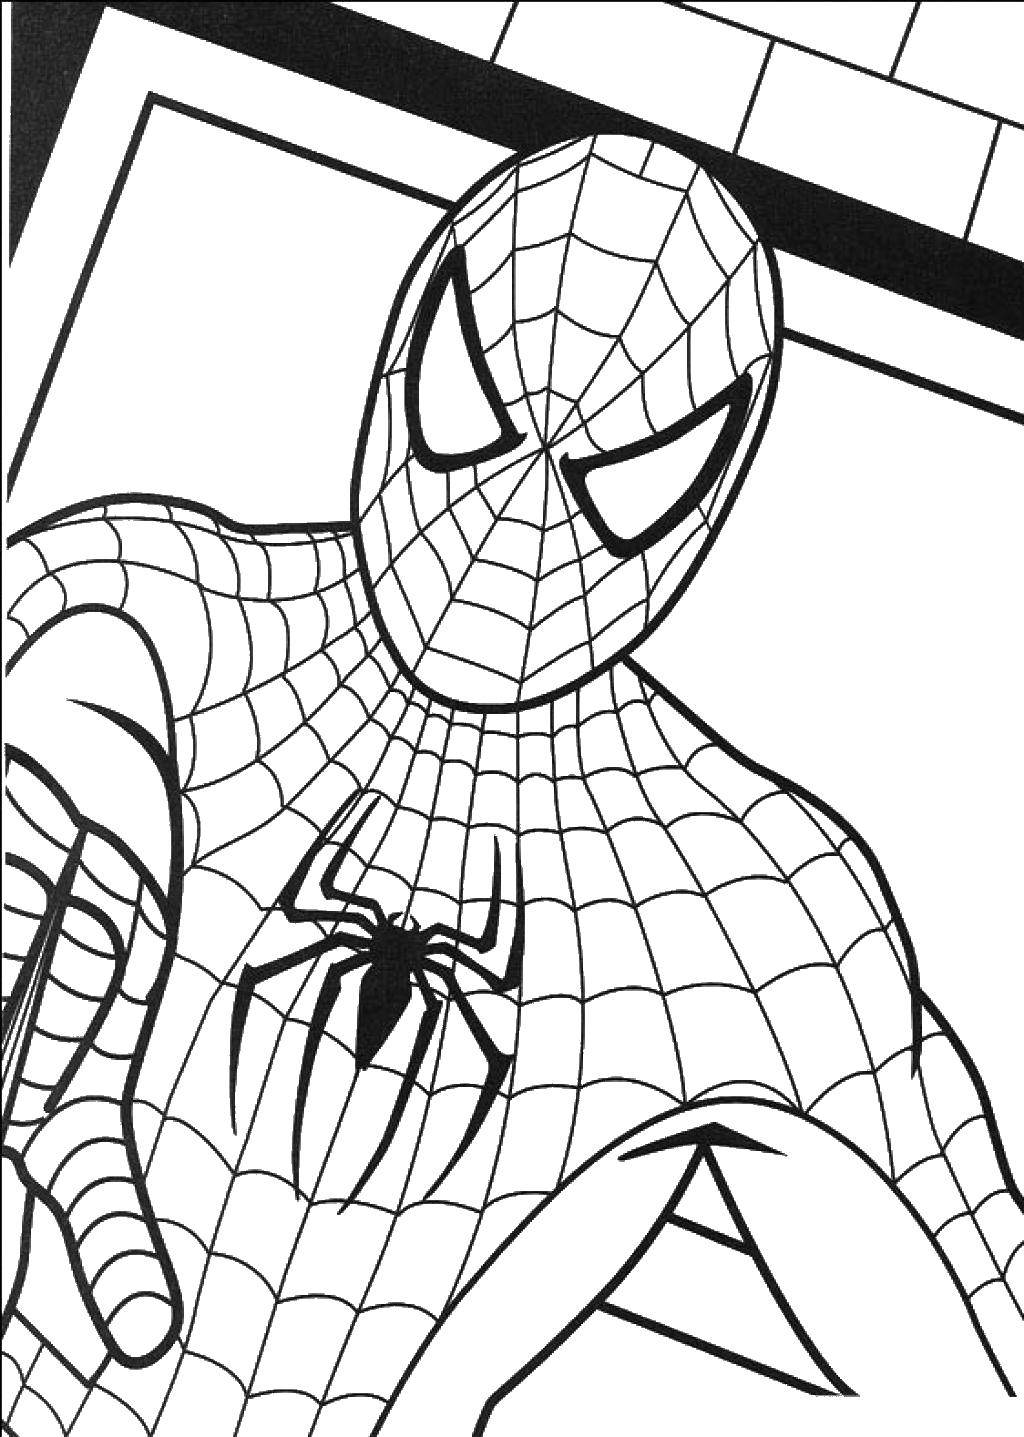 Coloring Spider-man. Category Comics. Tags:  Comics, Spider-Man, Spider-Man.